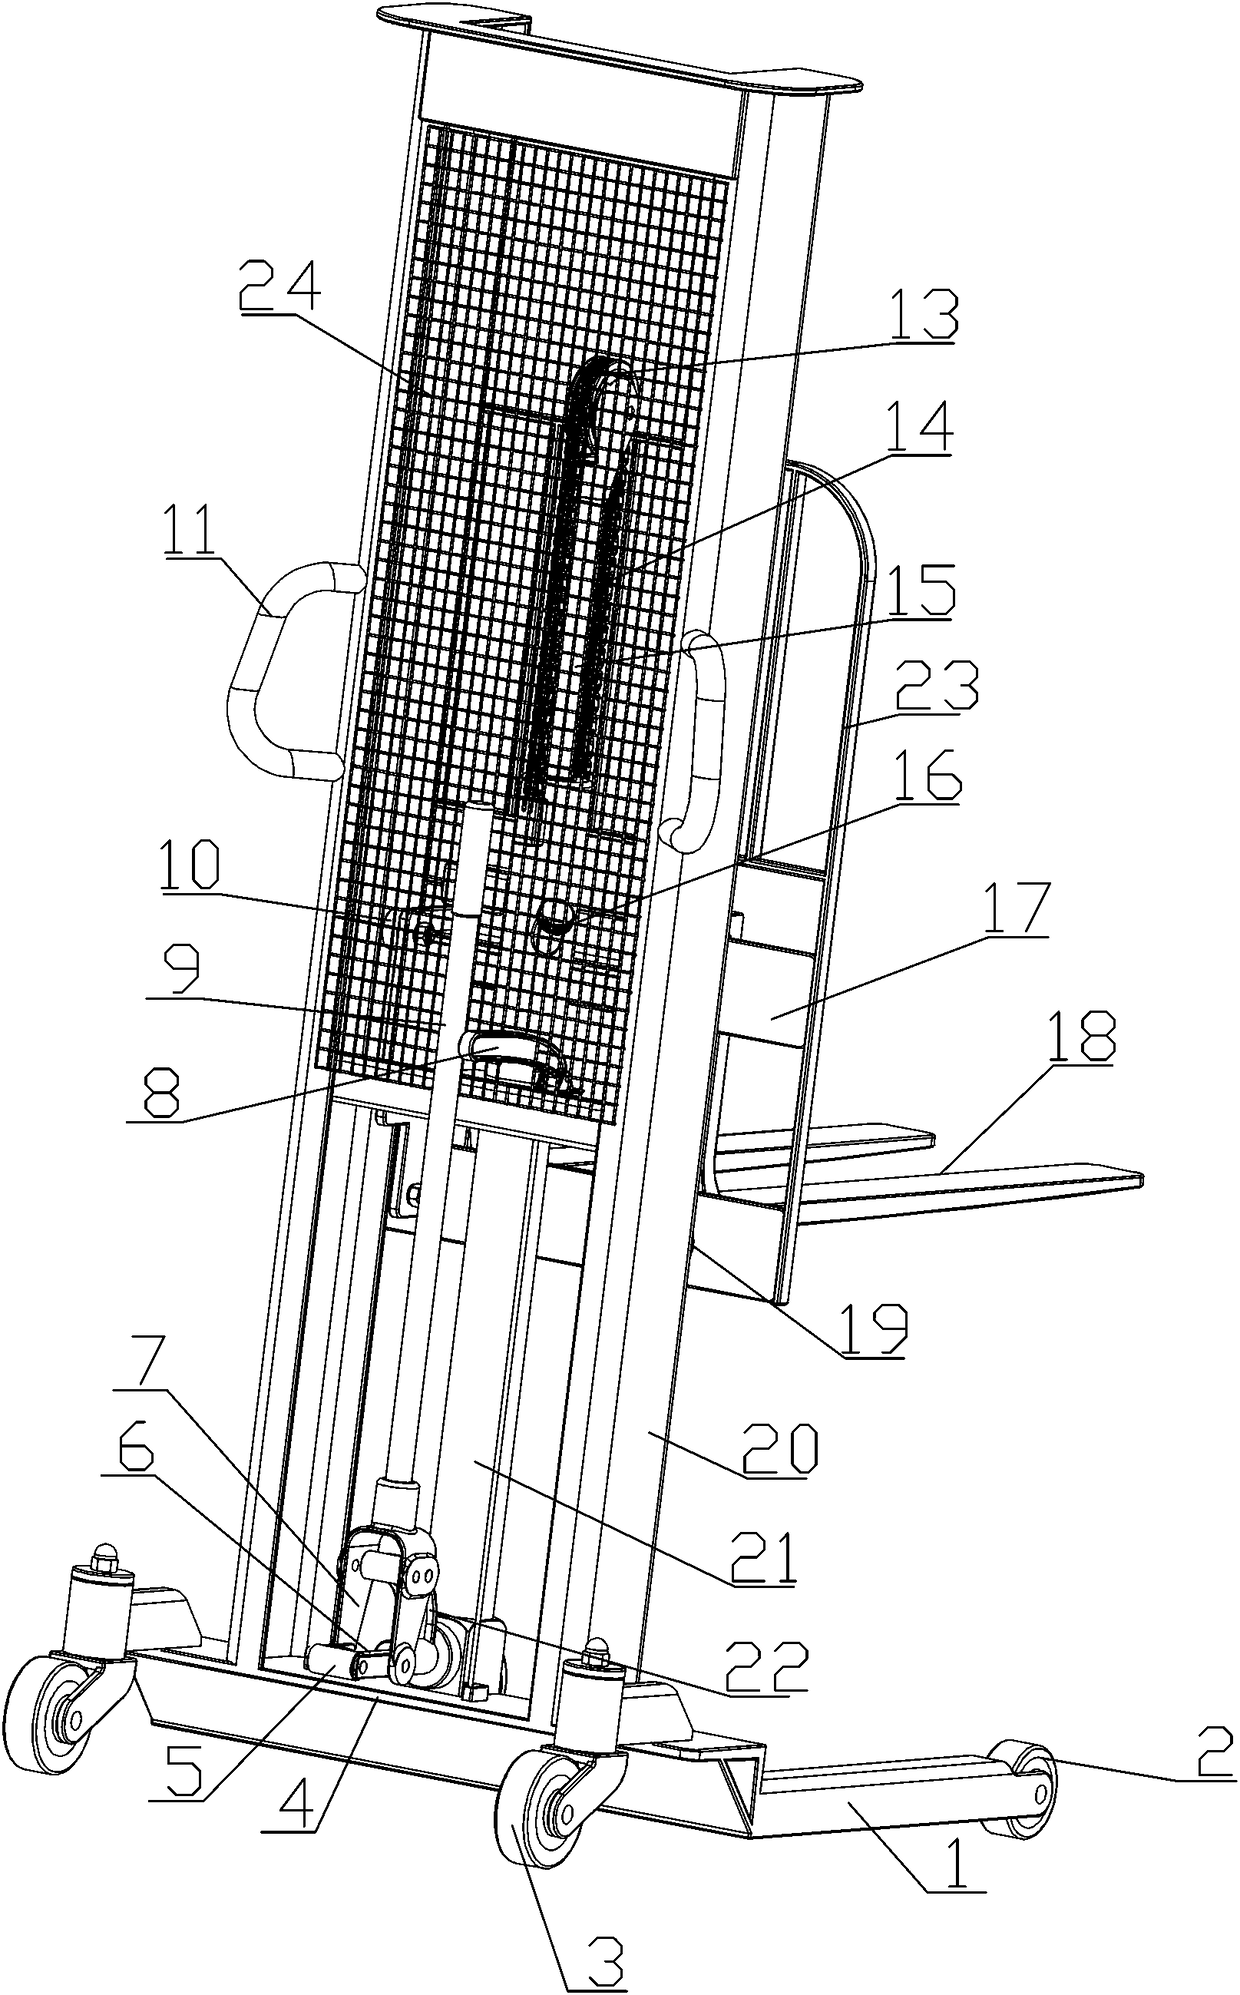 Manual hydraulic forklift for constructional engineering and operating method